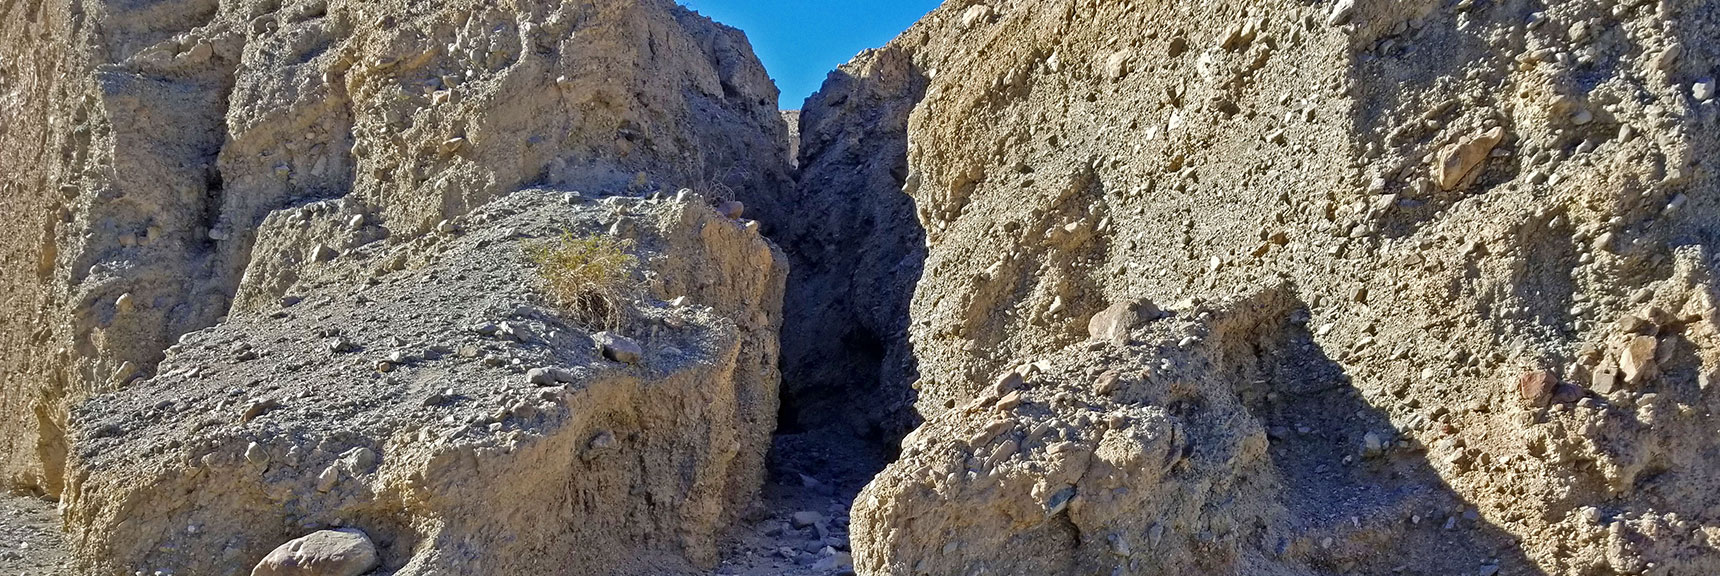 Second Unofficial Slot Off Canyon | Sidewinder Canyon | Death Valley National Park, California